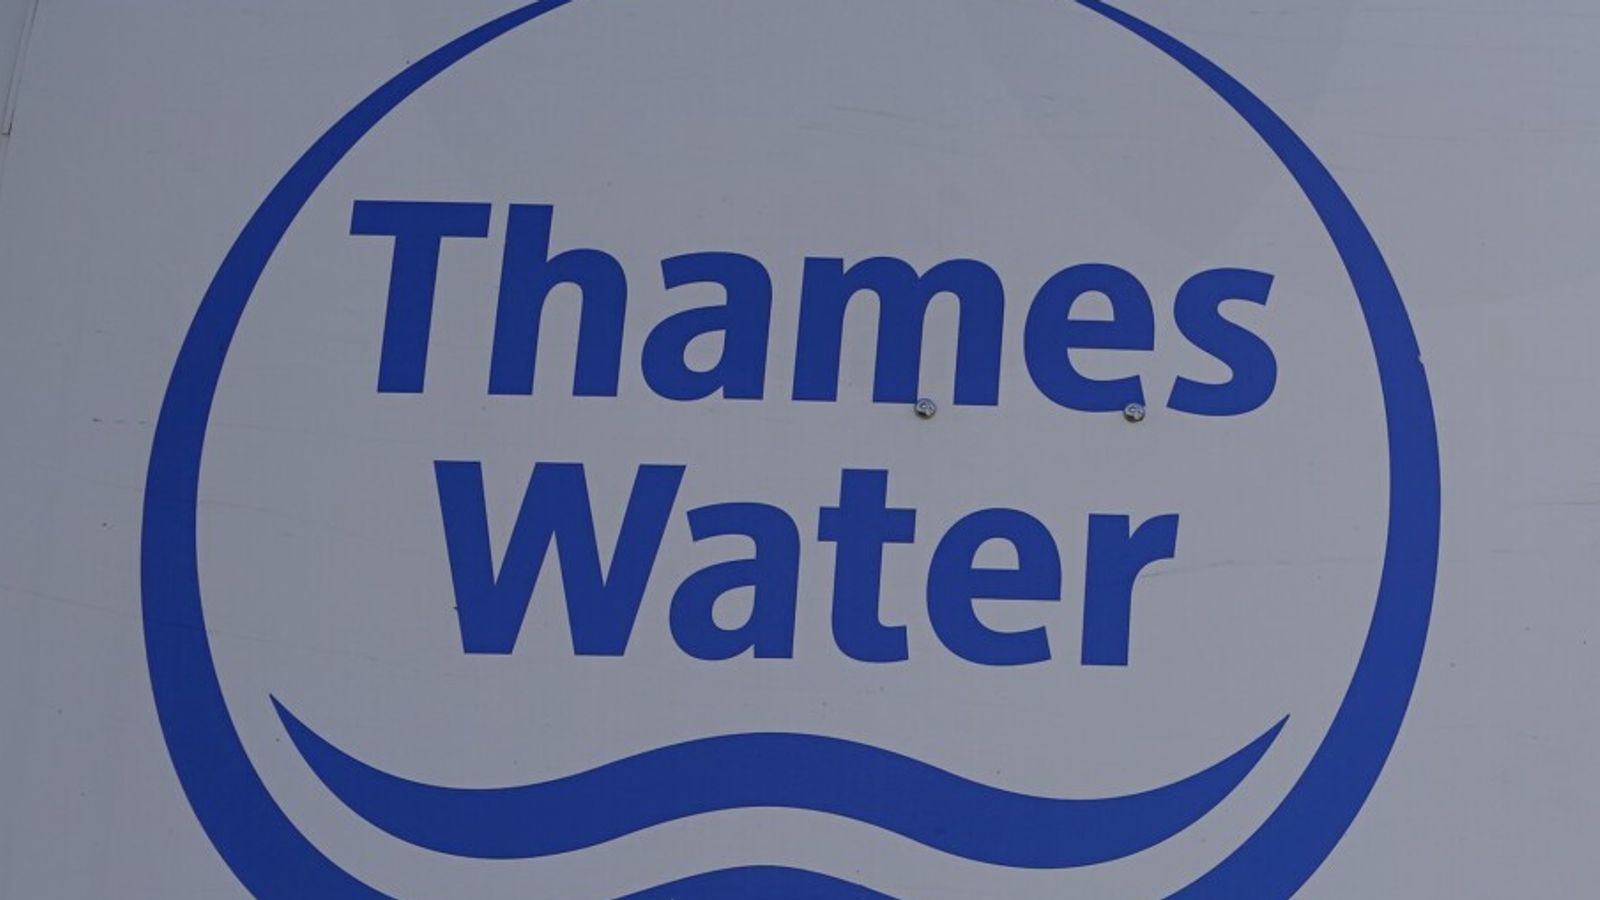 Ministers weigh contingency plan for collapse of Thames Water